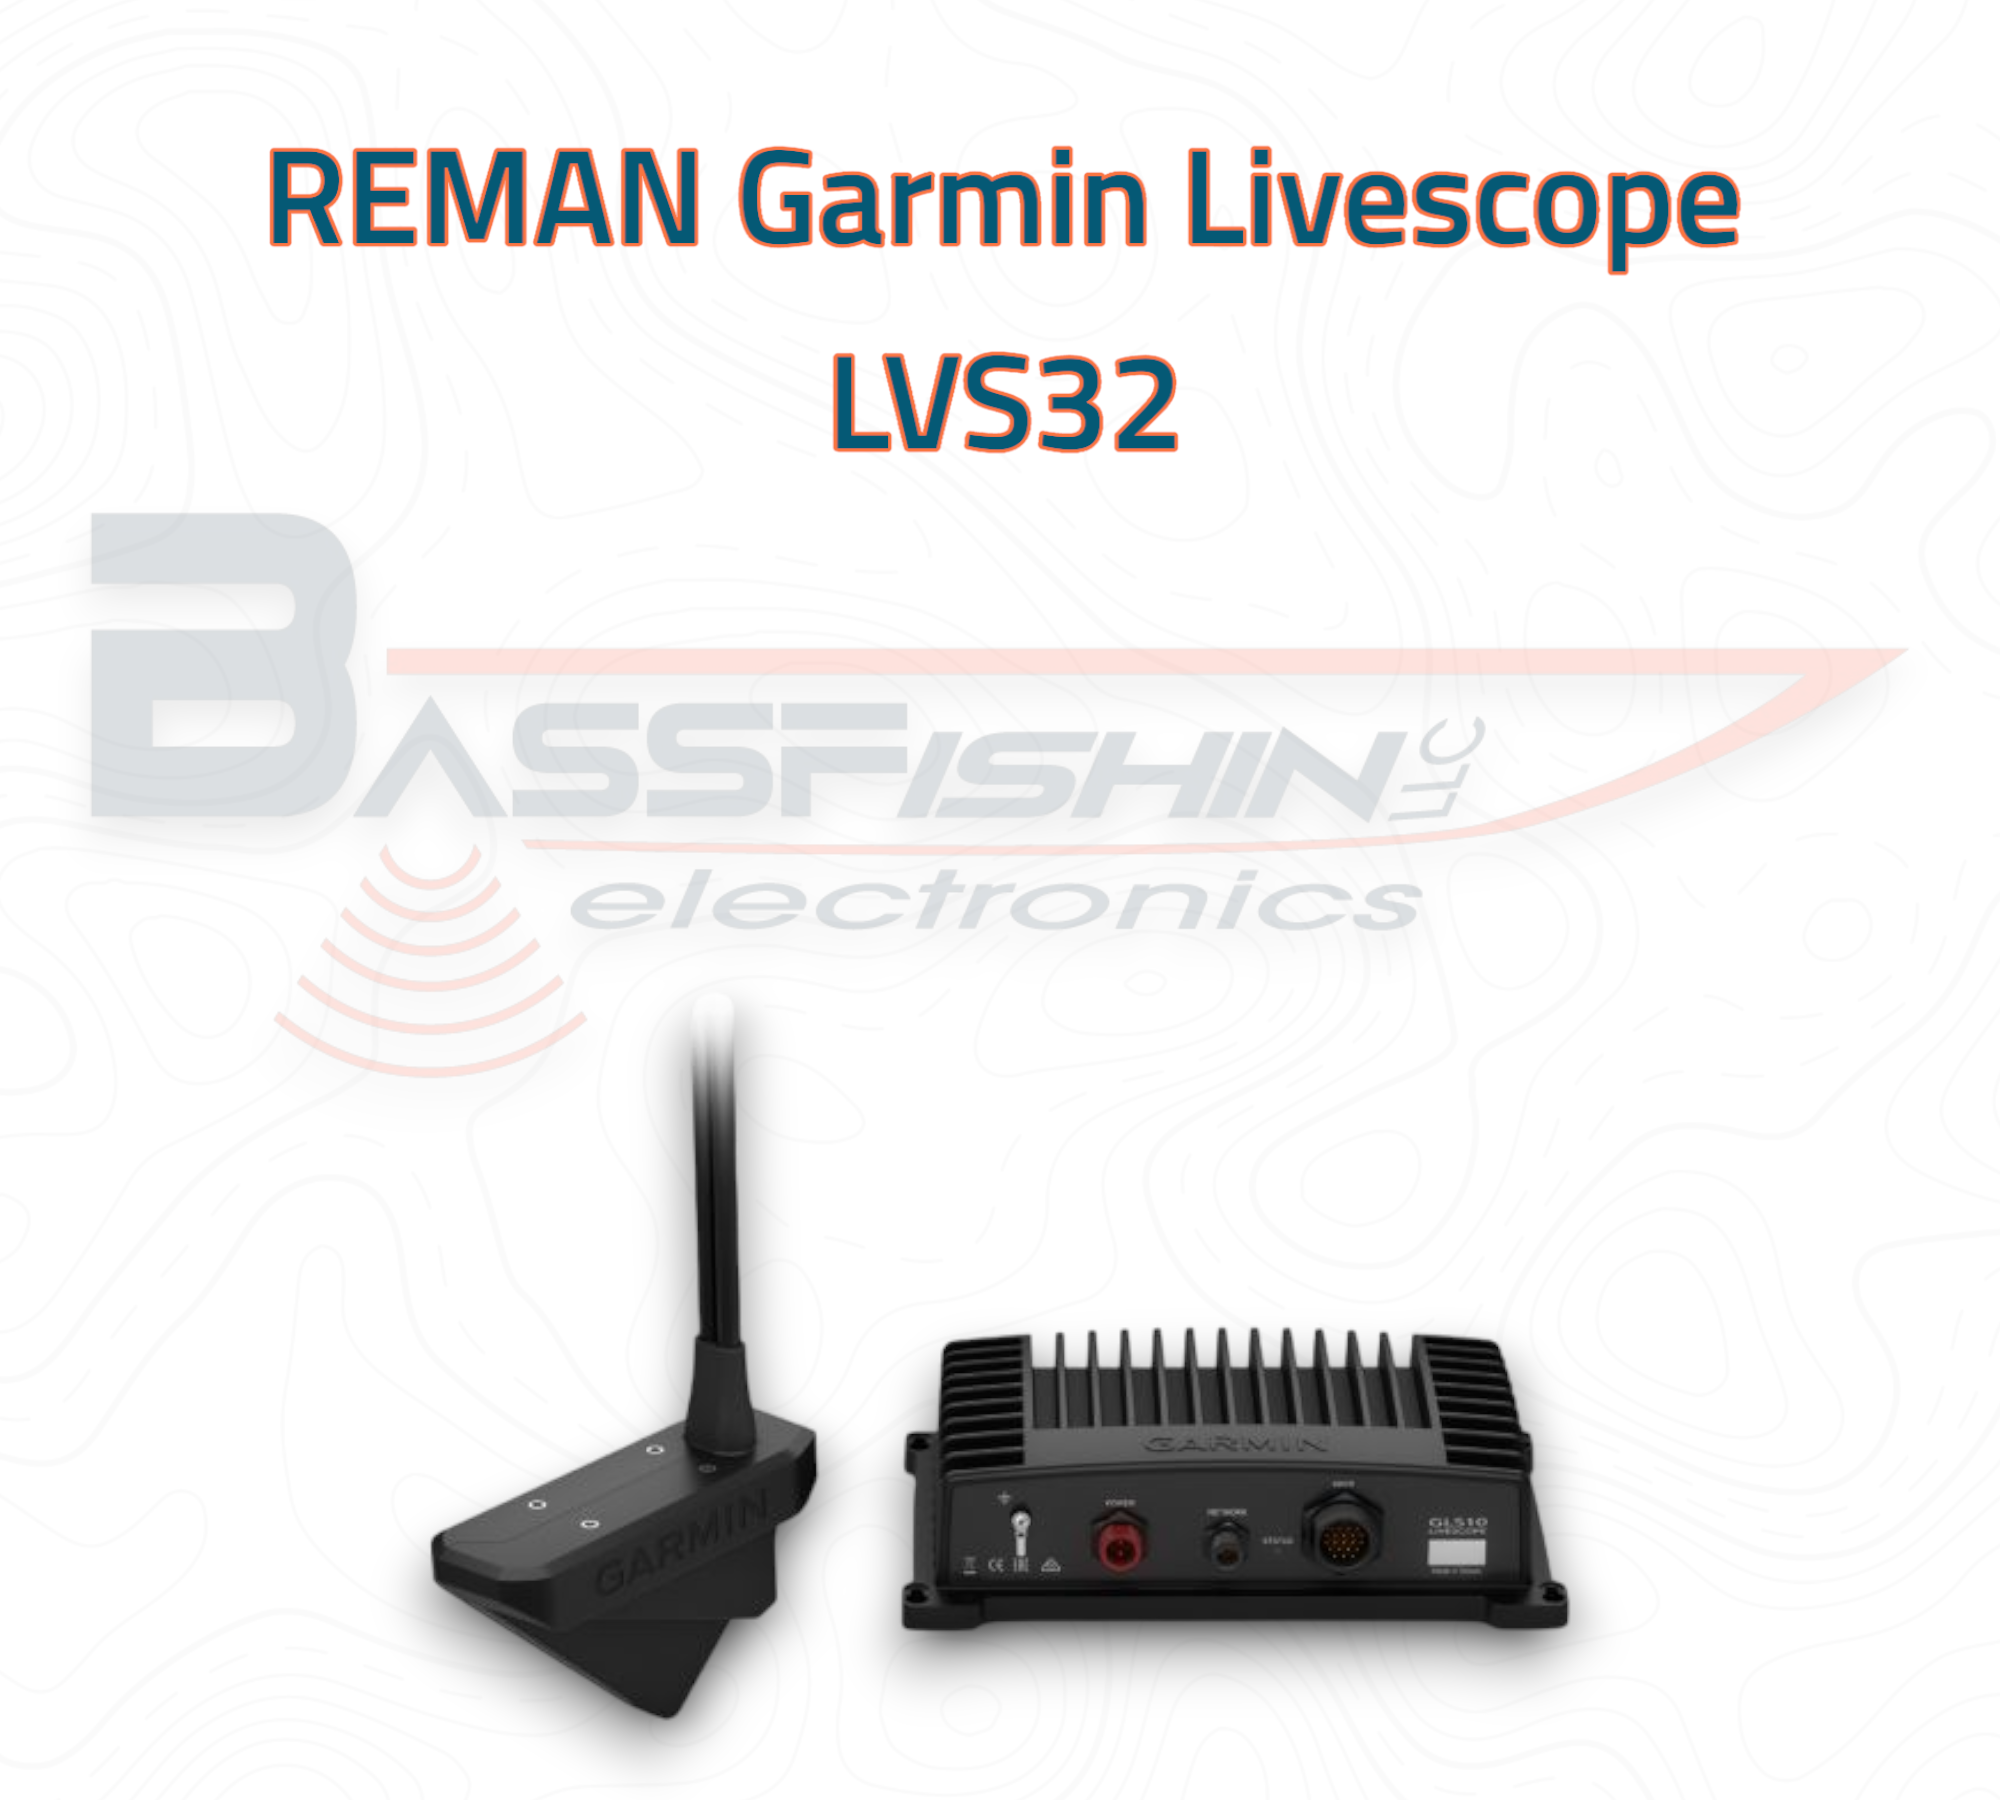 Garmin Livescope Bundle Weights (Different cases, screens, batteries and  cables) - Garmin Electronics - Garmin Electronics - Page 2